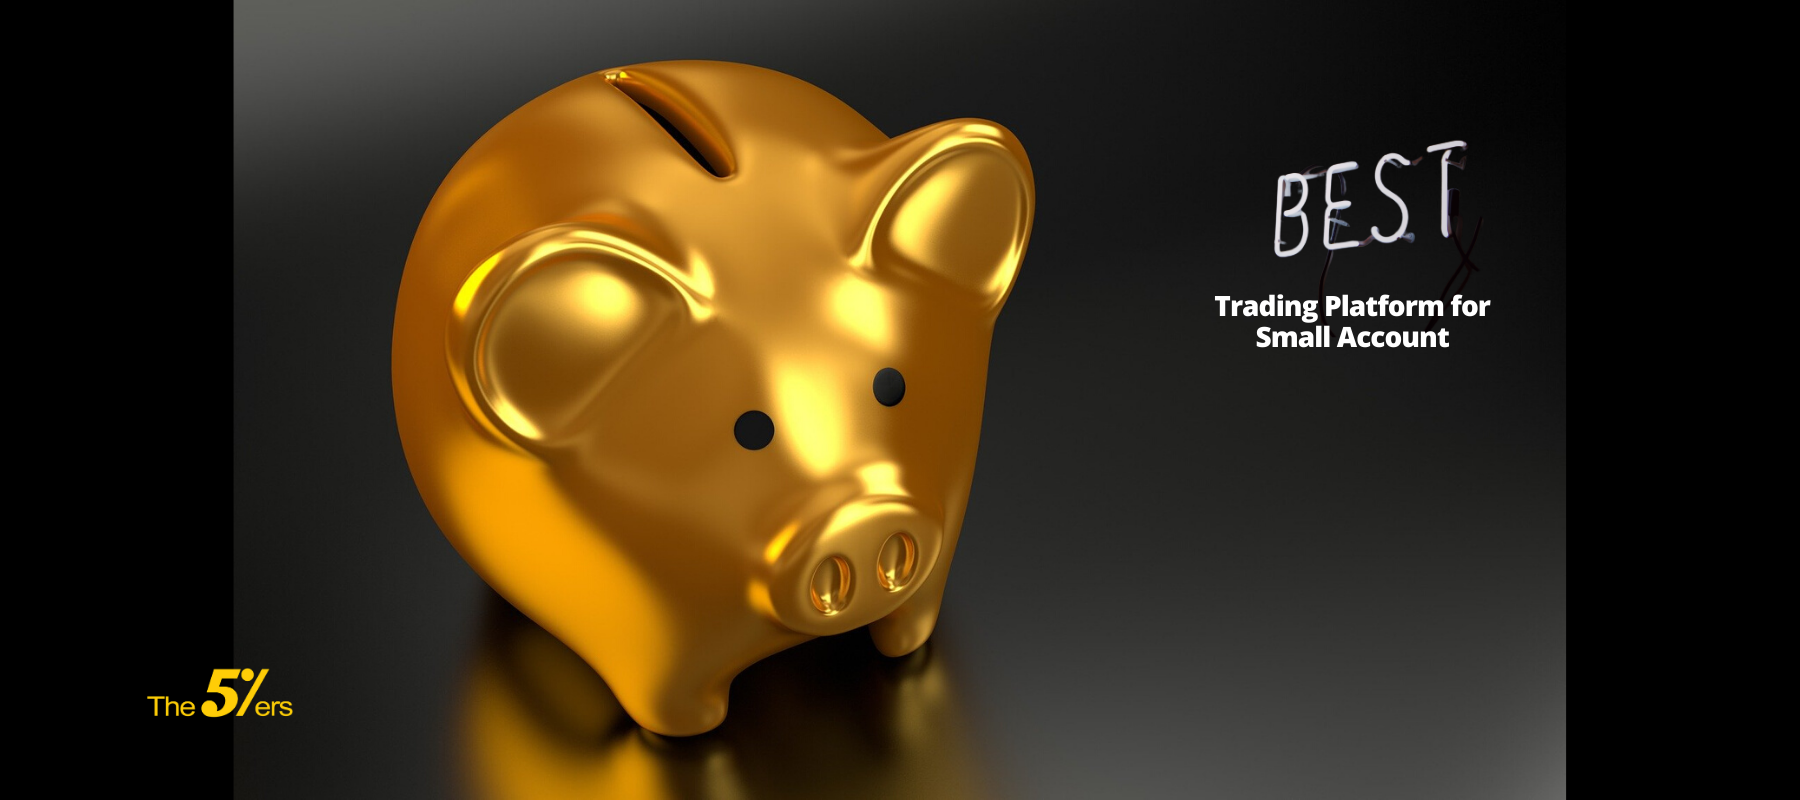 The Best Trading Platform for Small Account